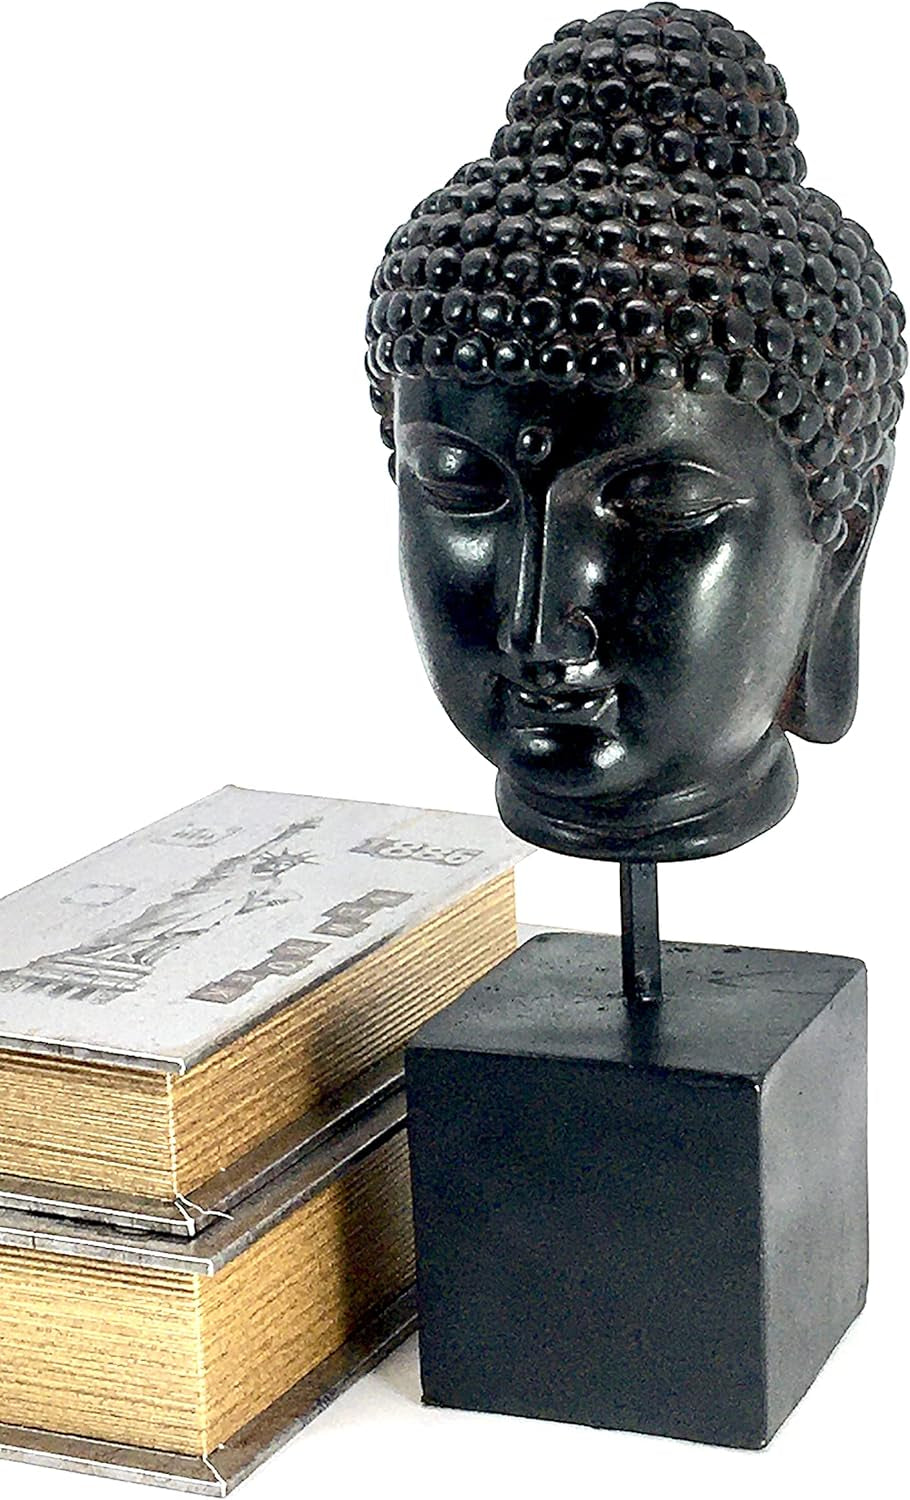 Buddha Head Statue Retro Rustic Vintage Decorative Bookends Bookshelves Stopper Support Heavy Duty Non Skid Book Ends Home Accents Bodhi Bust Buda Calming Zen Meditation